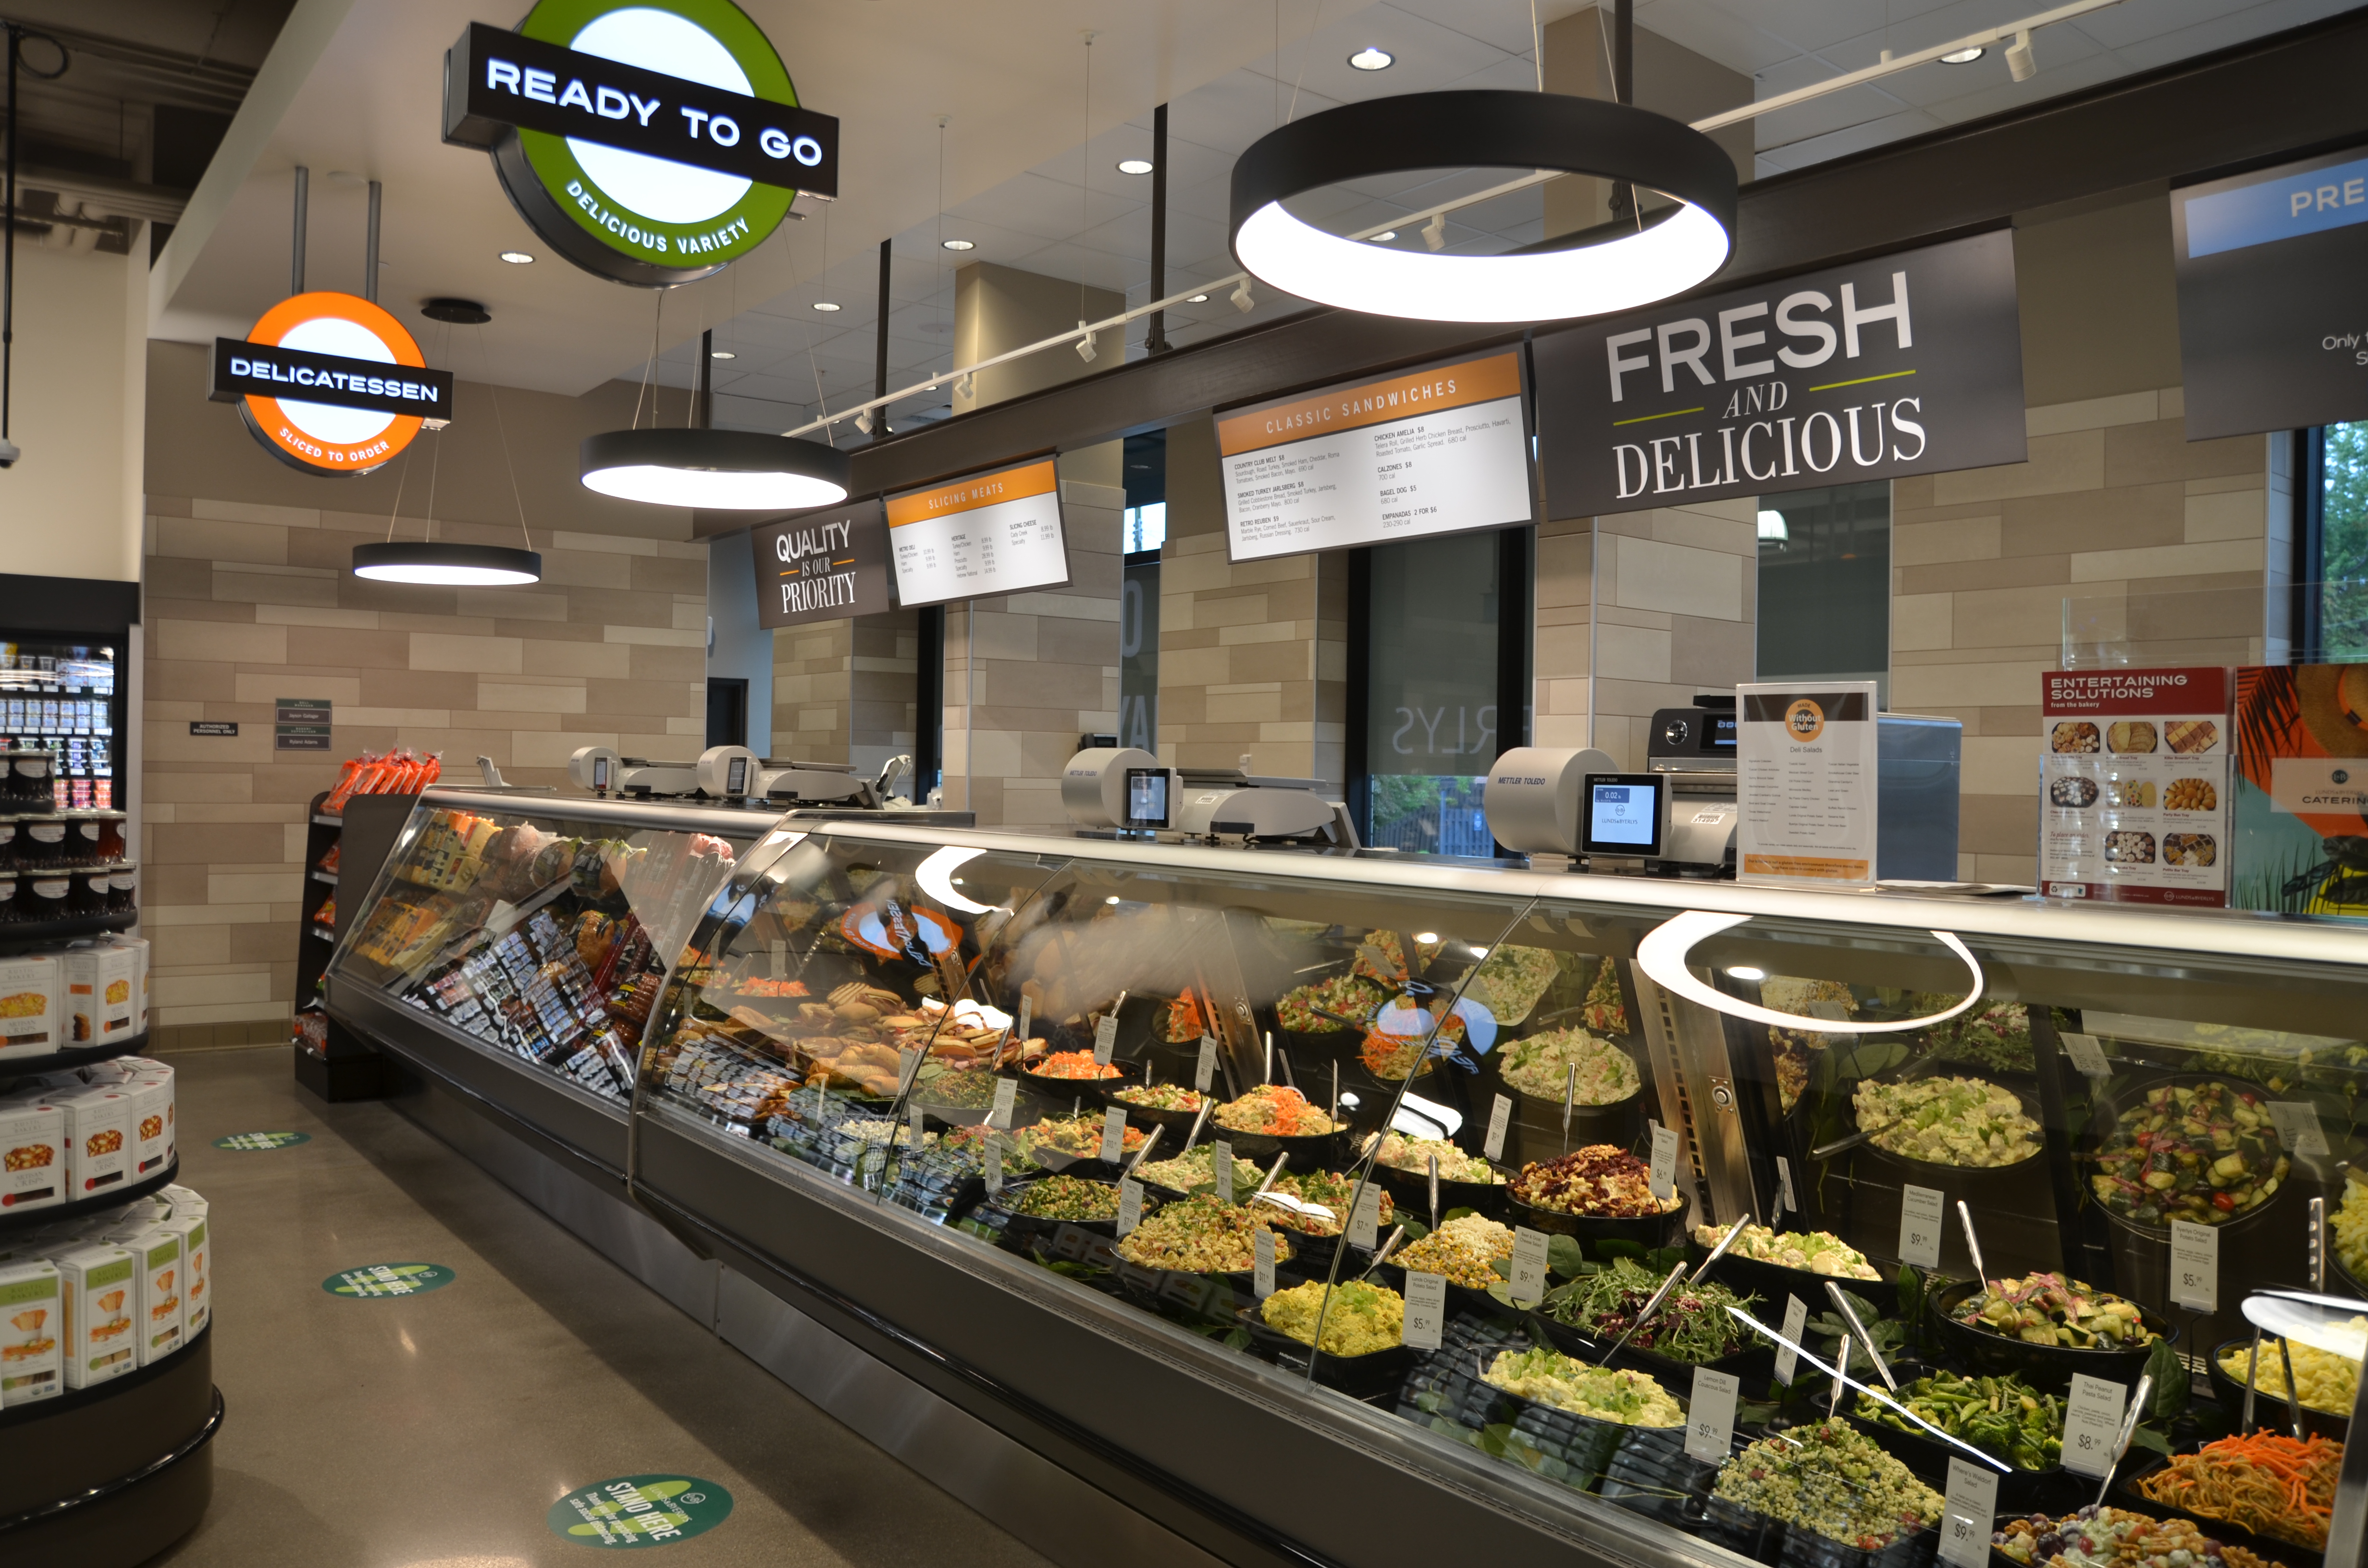 A deli section with a Fresh And Delicious sign and a Ready To Go sign.